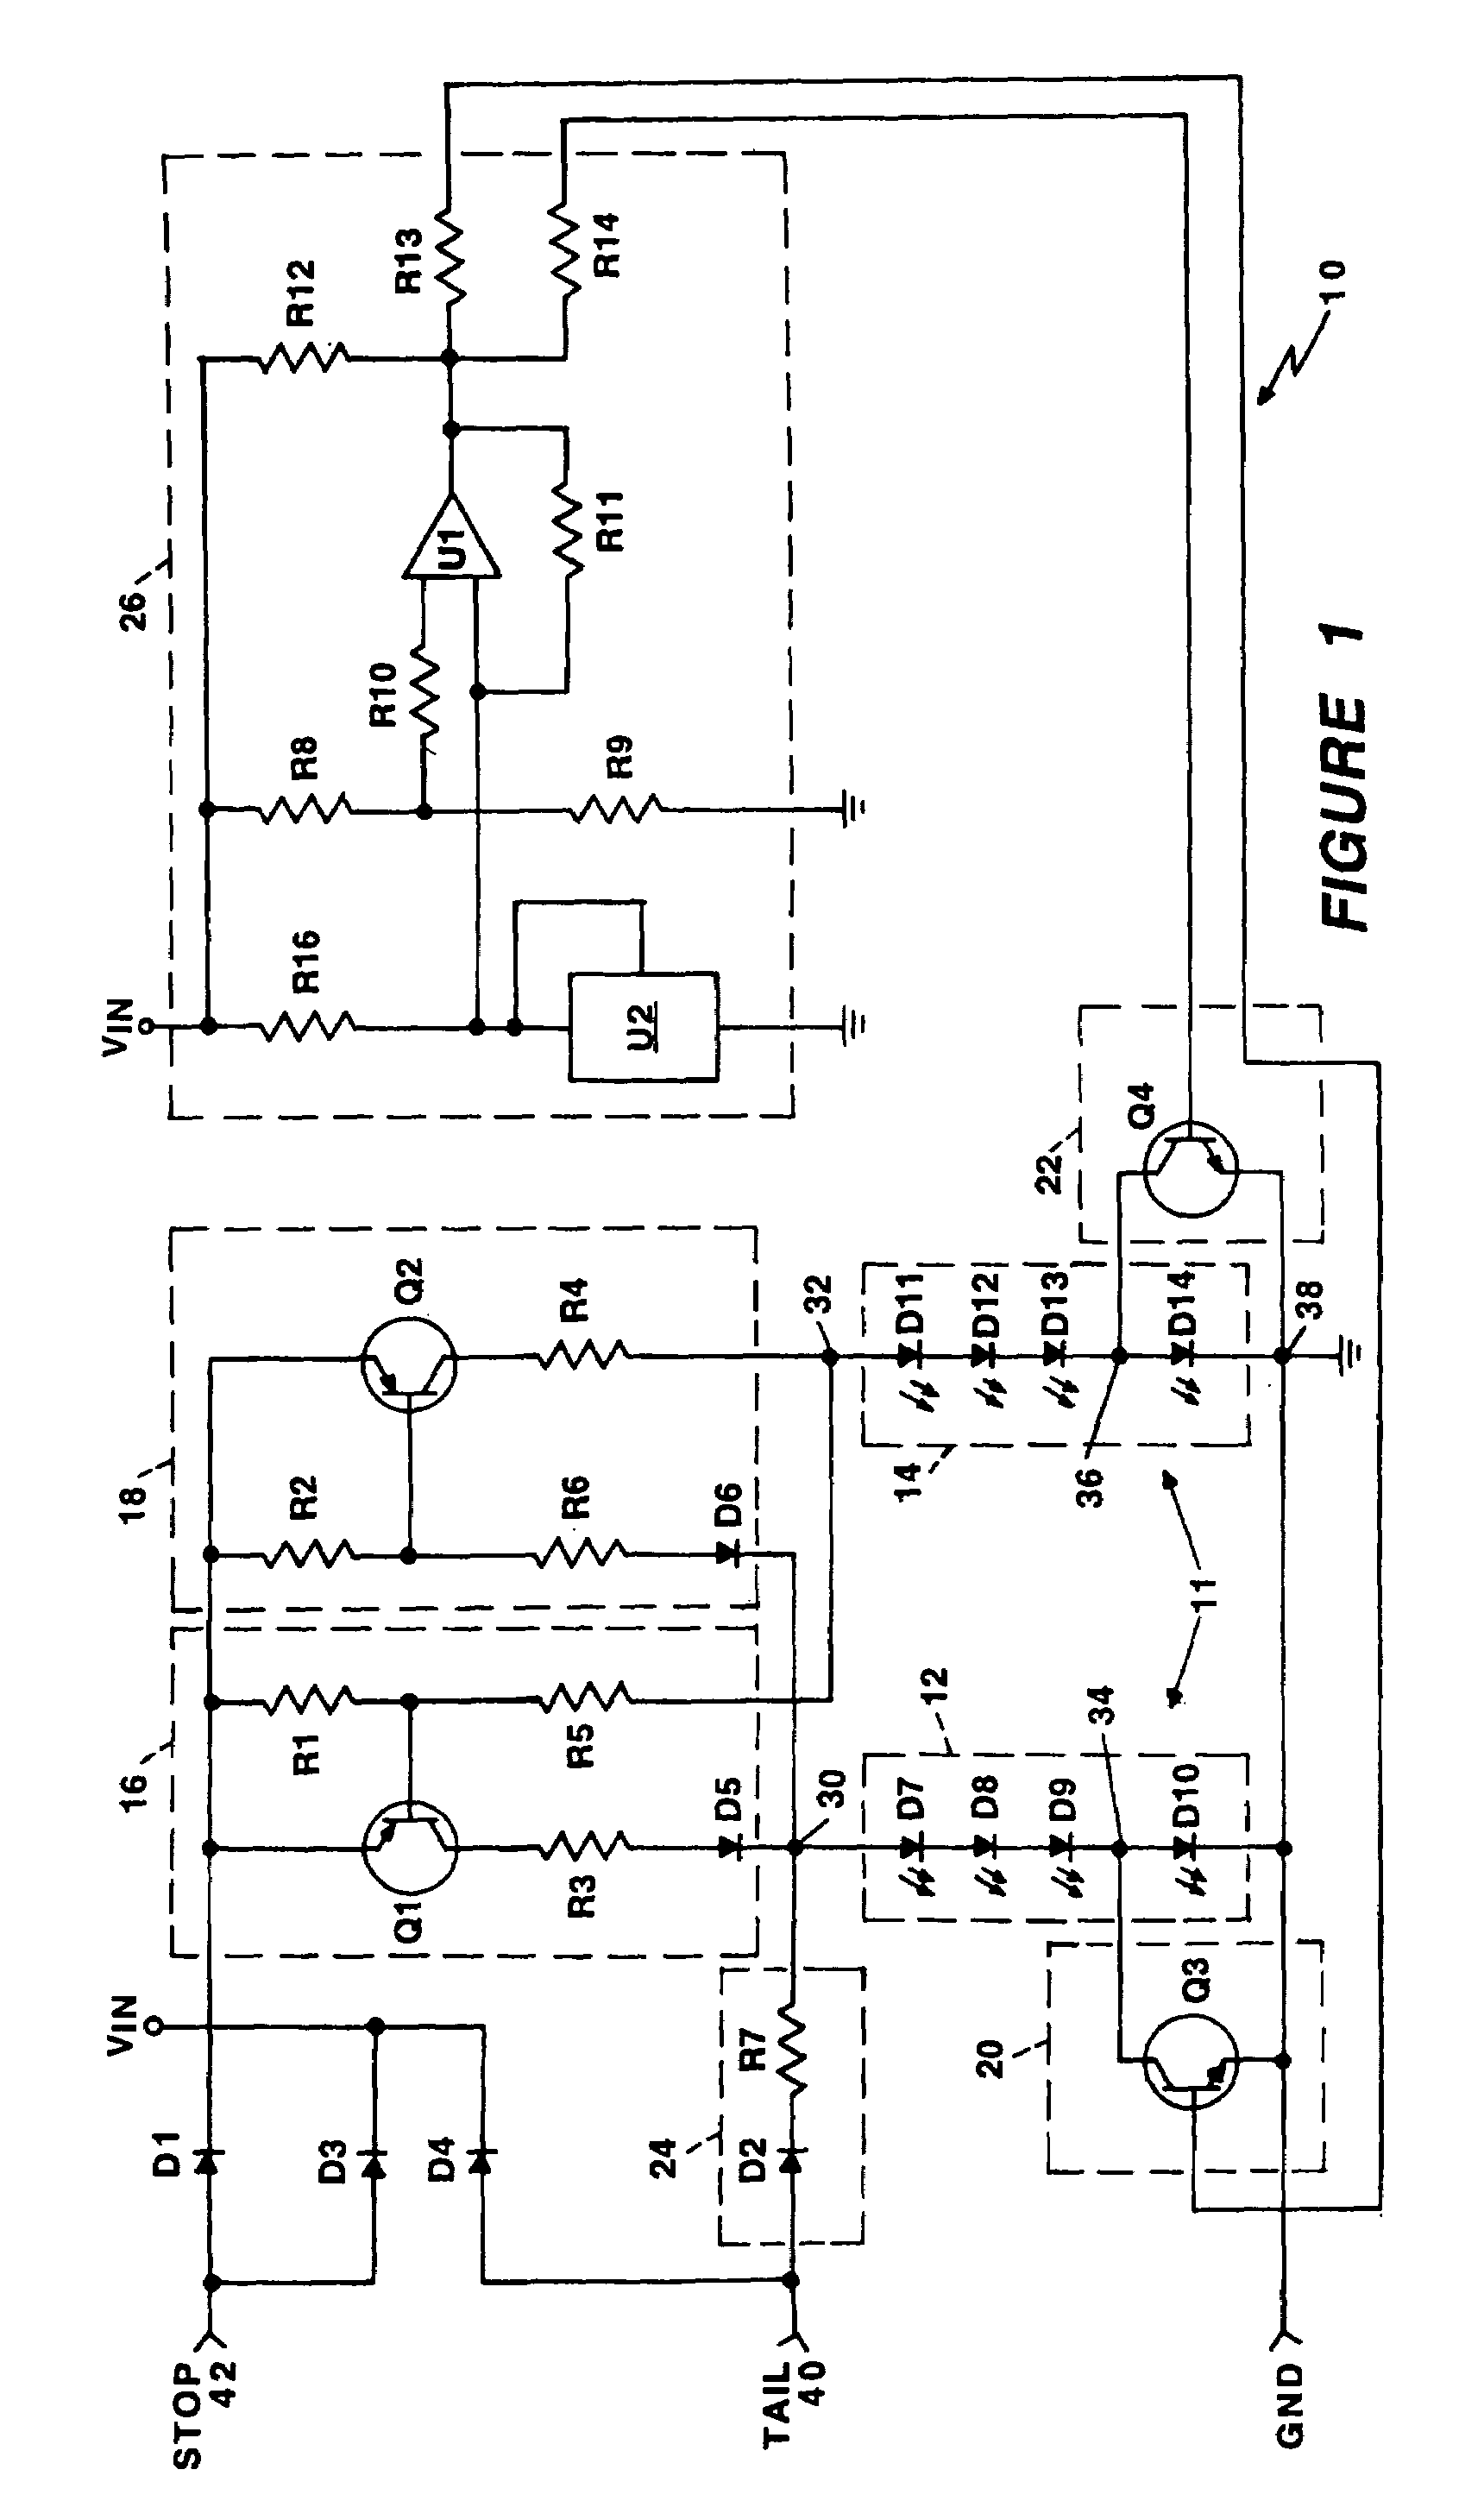 Driver circuit for LED vehicle lamp